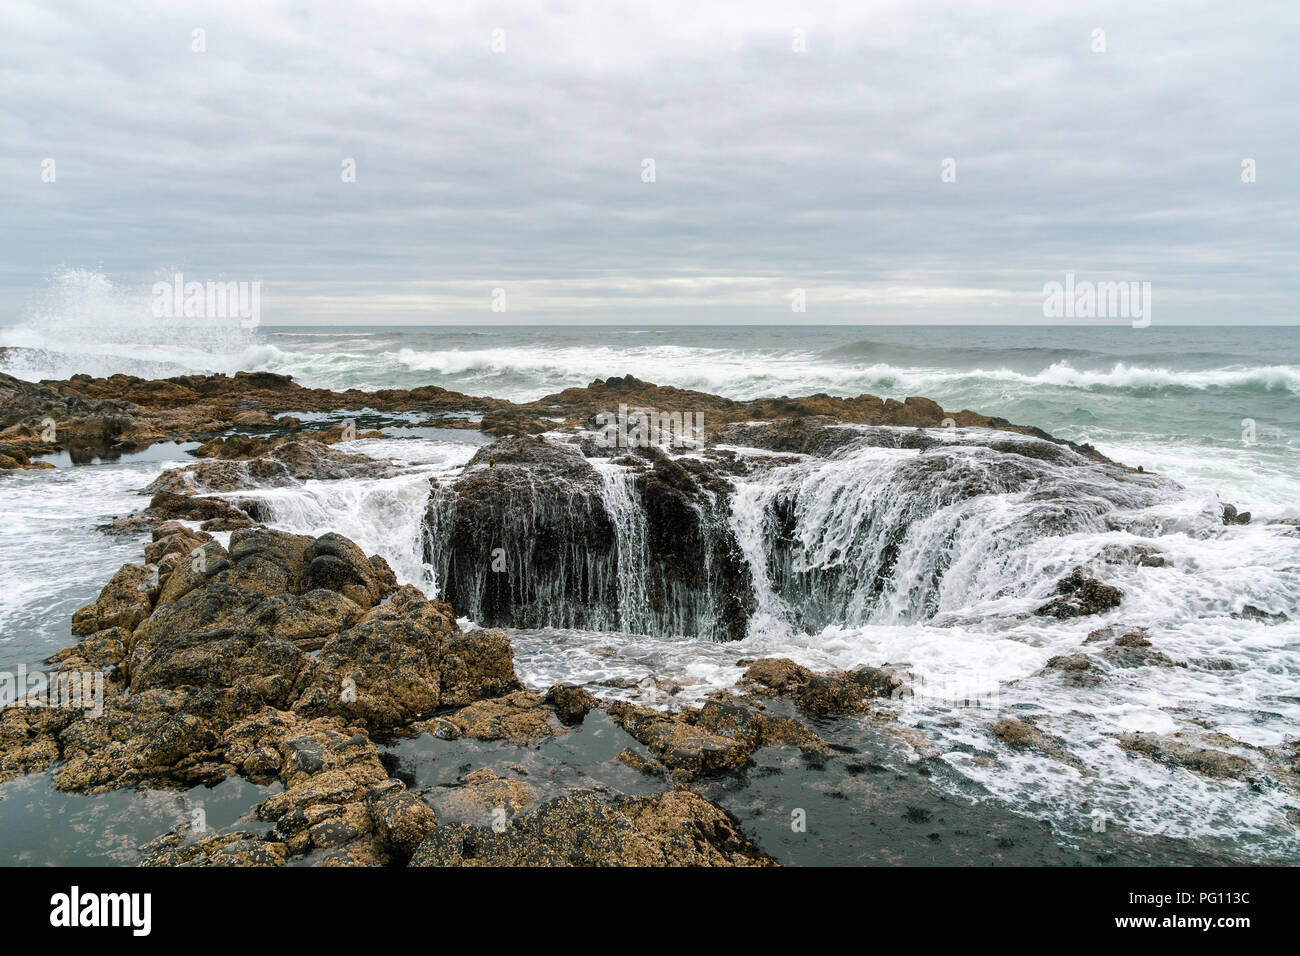 The Thor's Well on the rocky basaltic headlands of Cape Perpetua Scenic Area, Yachats, Oregon Coast, US route 101, USA. Stock Photo